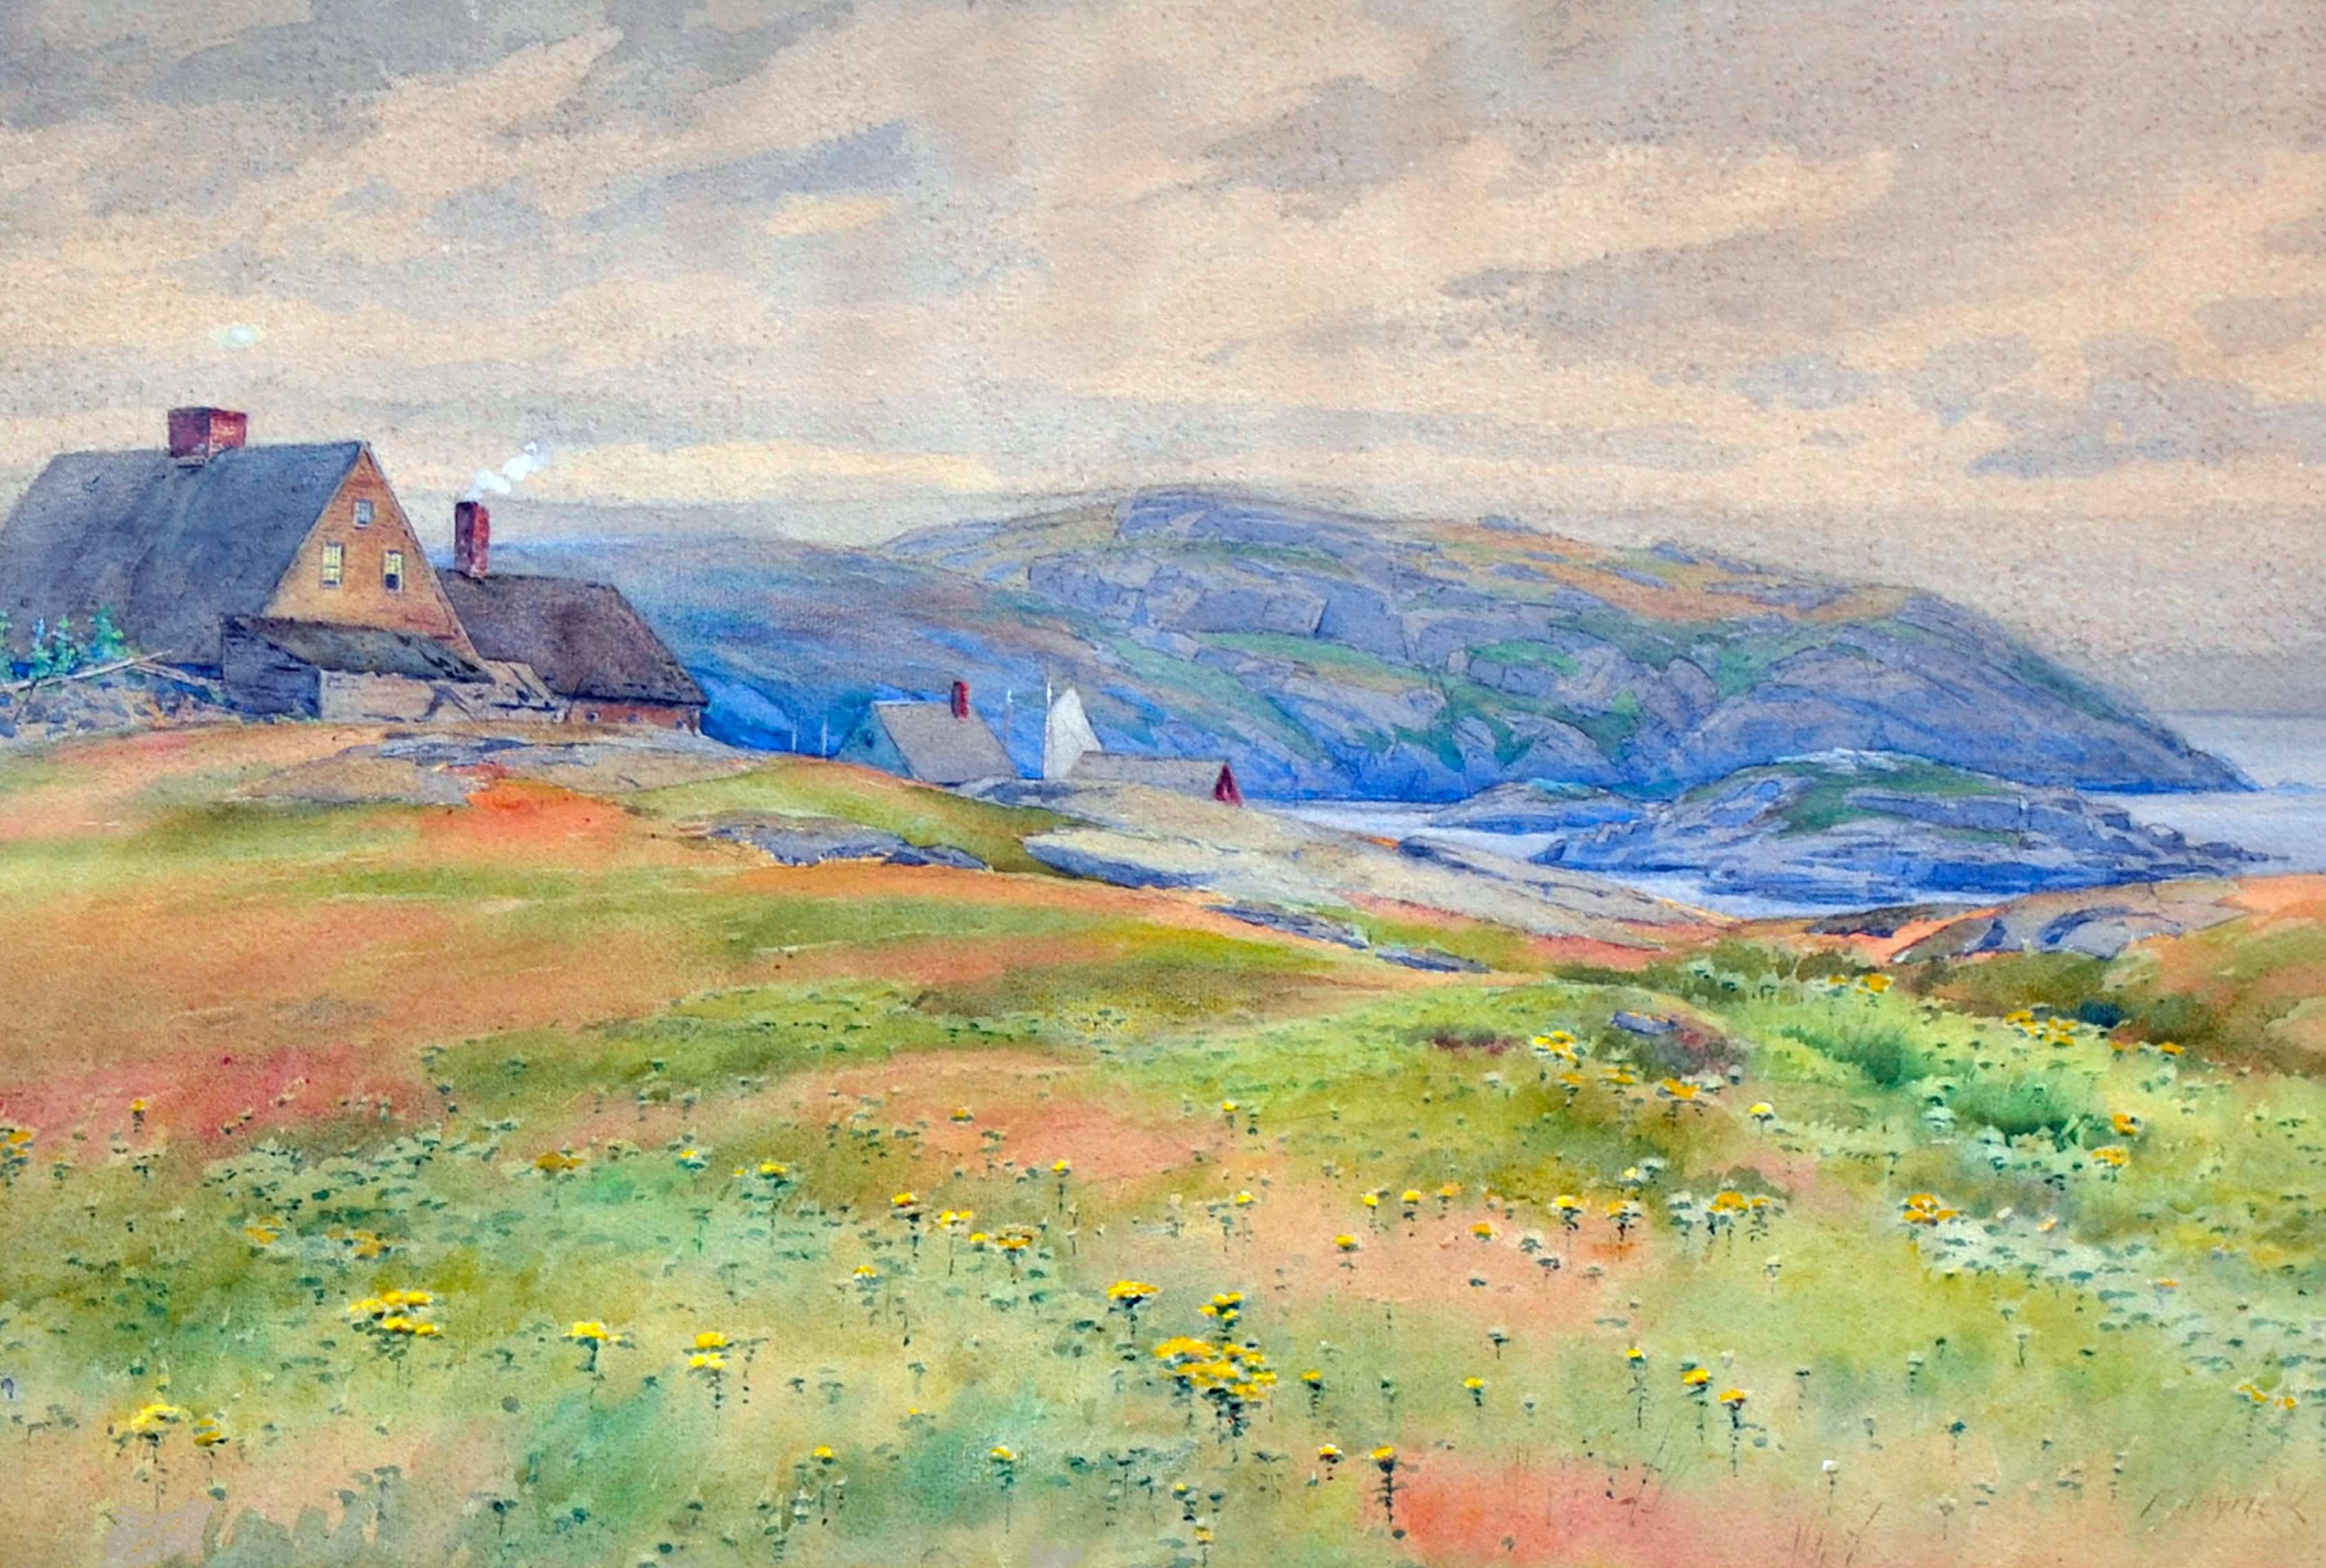 Home on the Coast - Painting by Frank Myrick